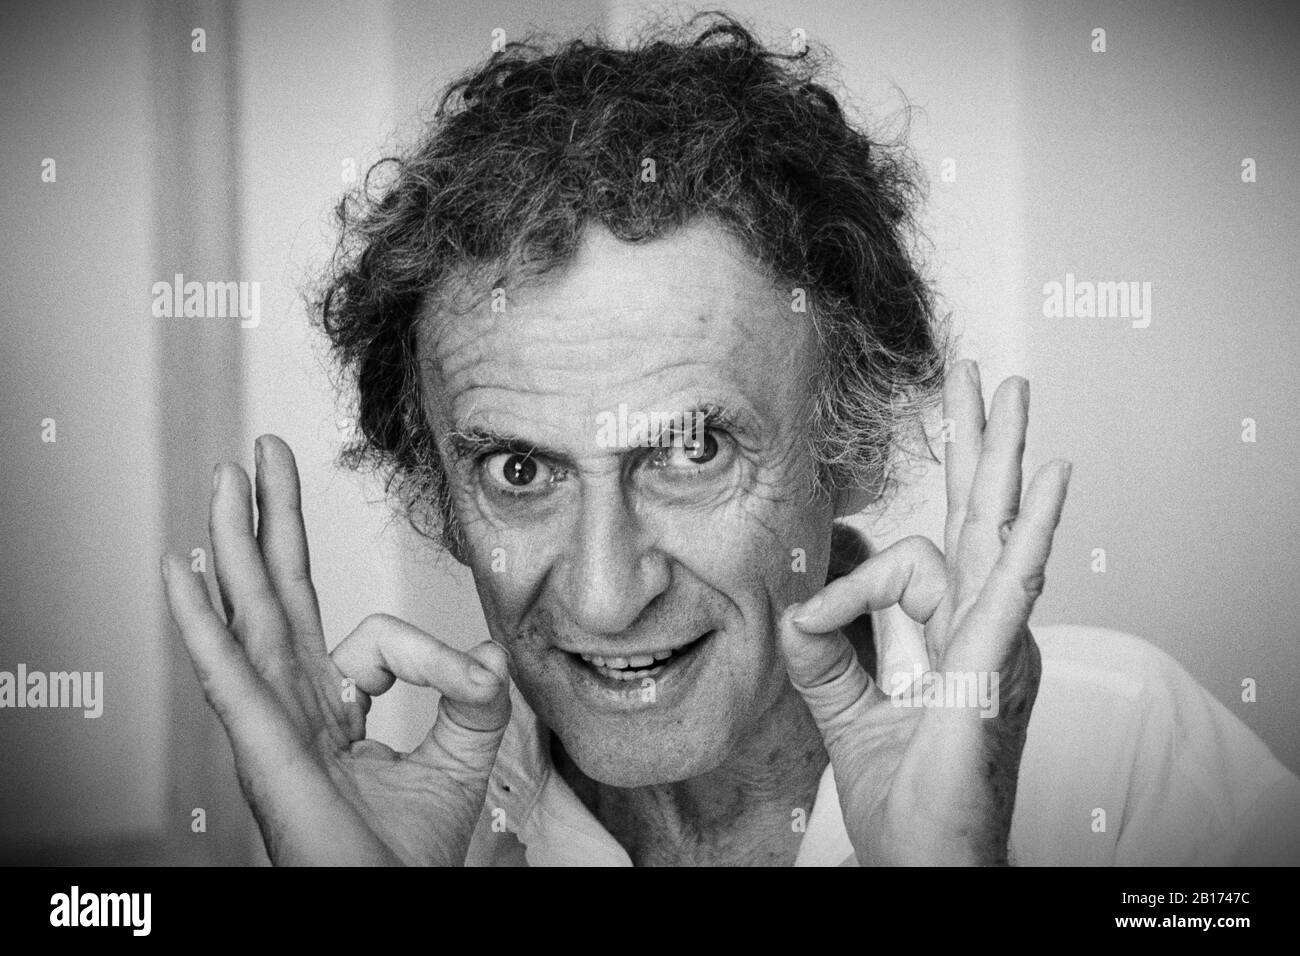 Marcel Marceau, French mime artist , 1923 - 2003. Photographed in London 1988. Stock Photo